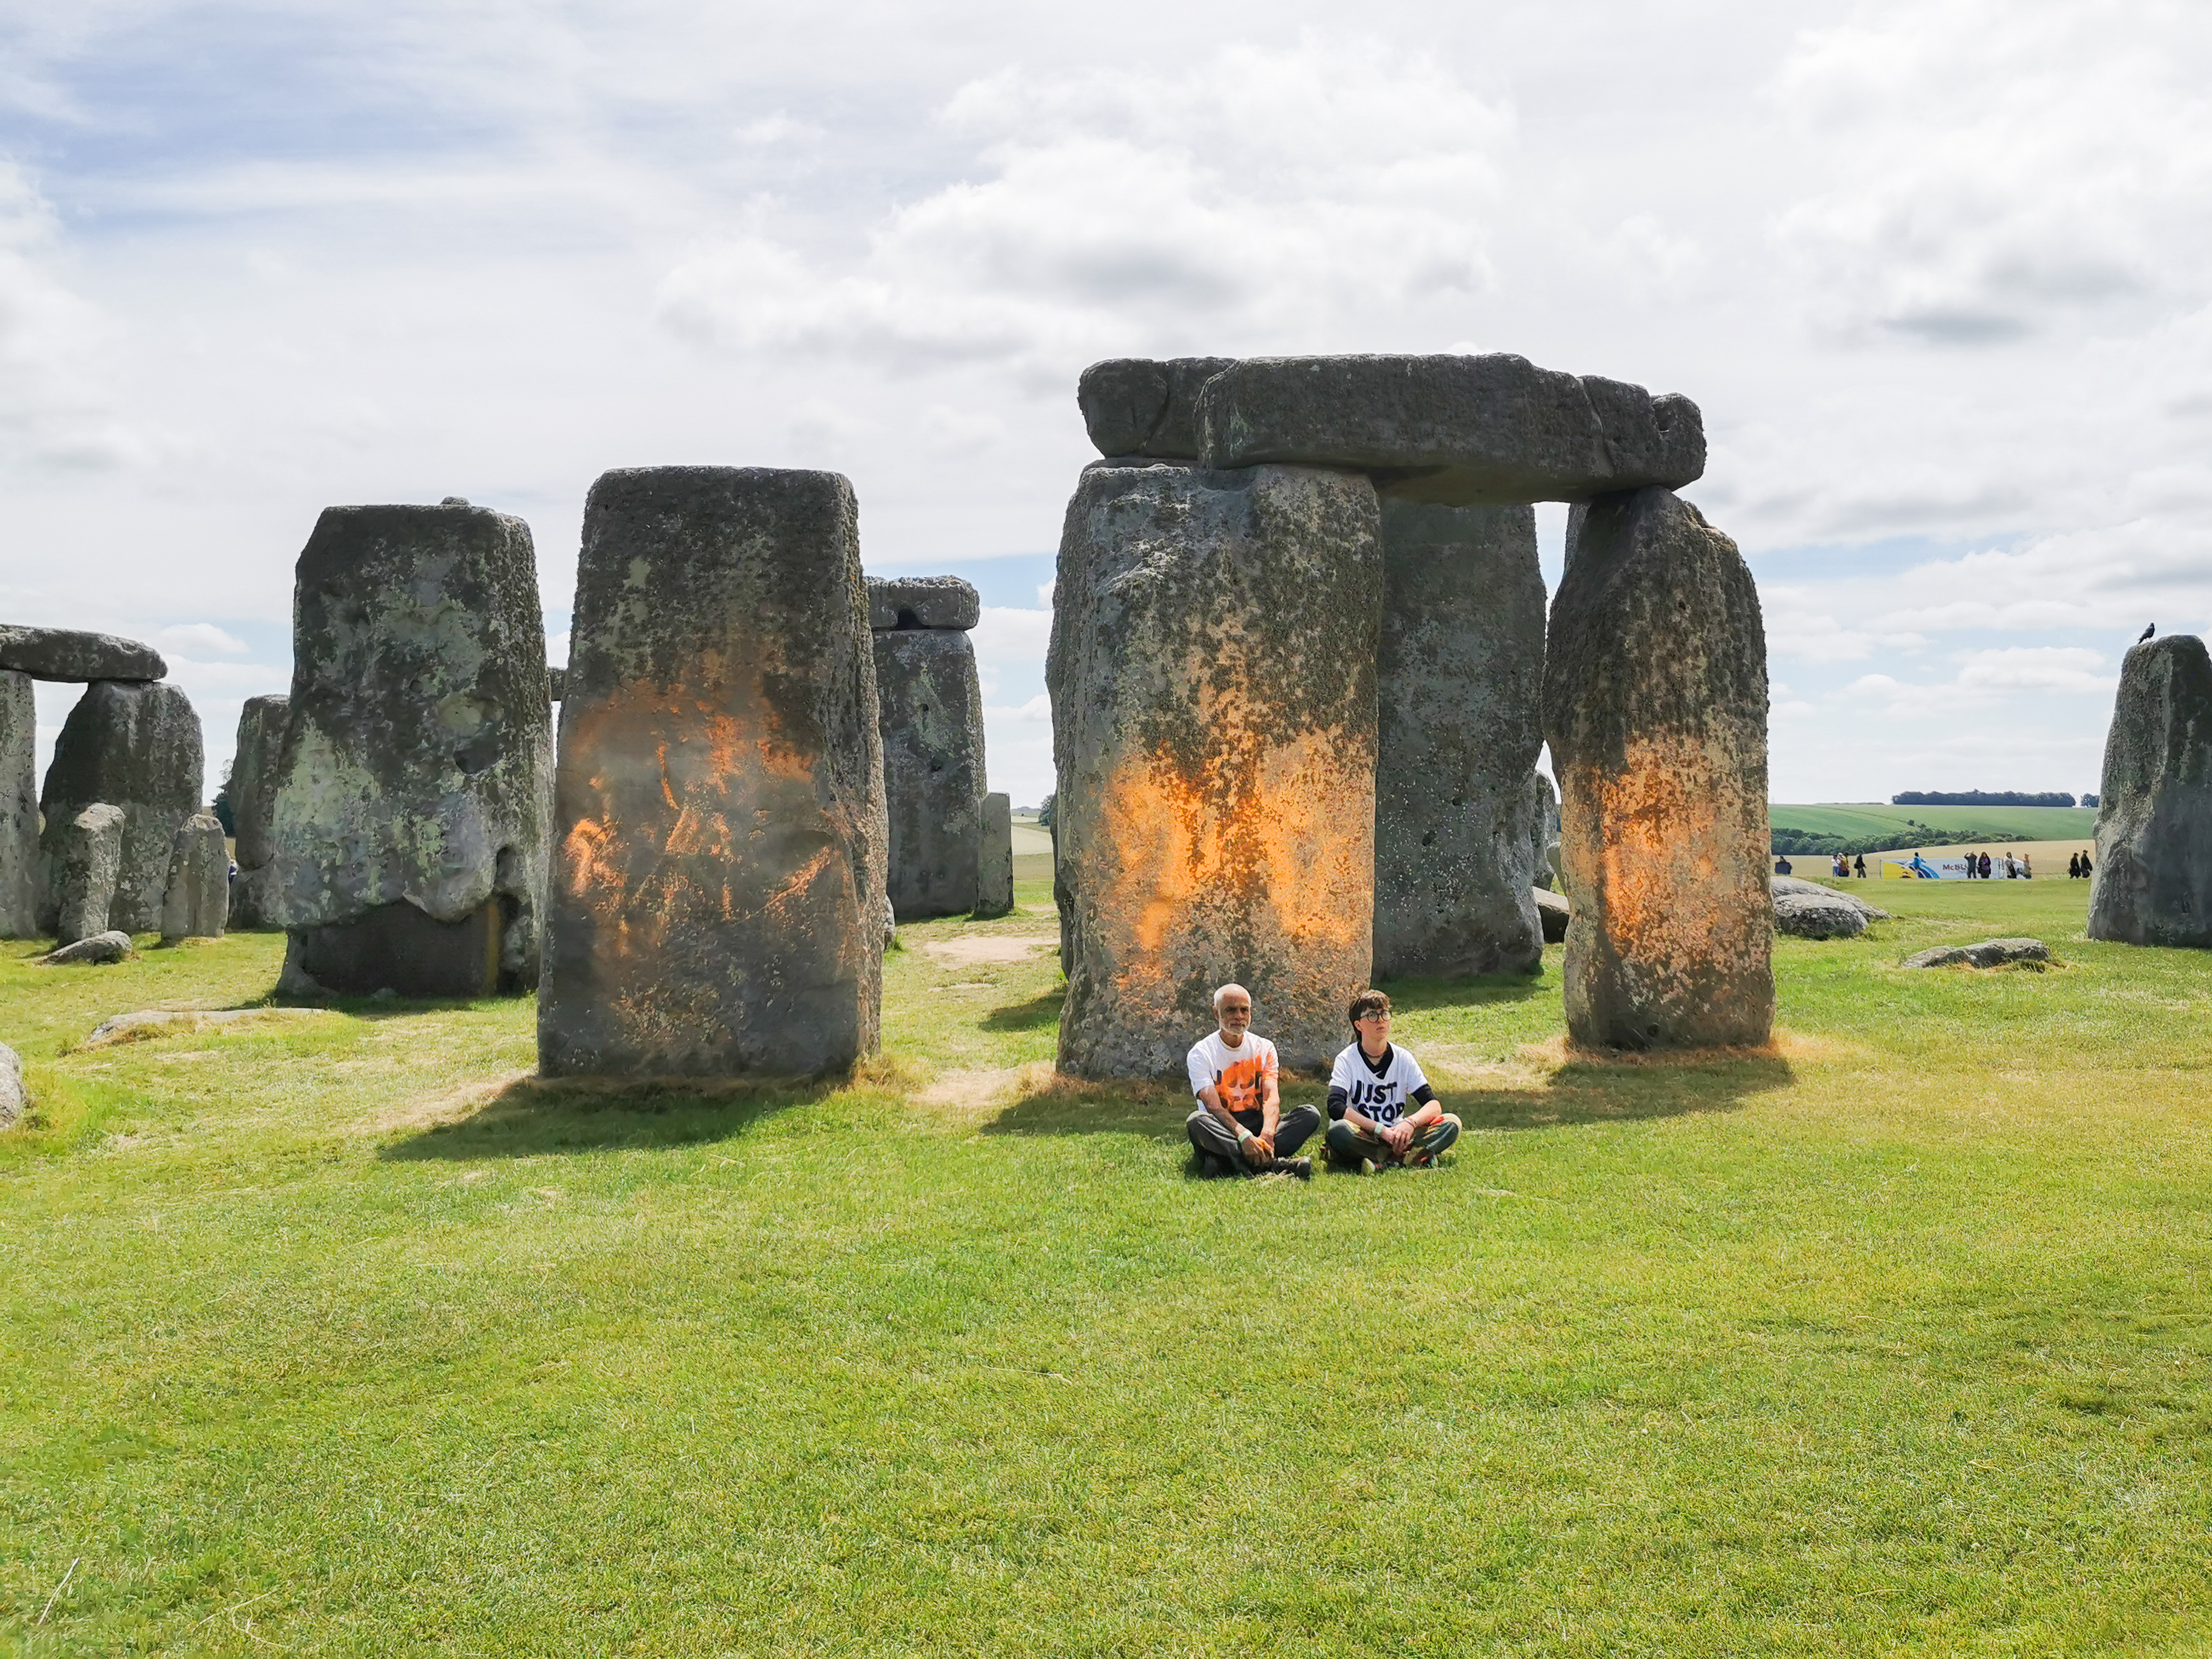 Just Stop Oil protesters sit in front of Stonehenge after dousing it with orange paint.